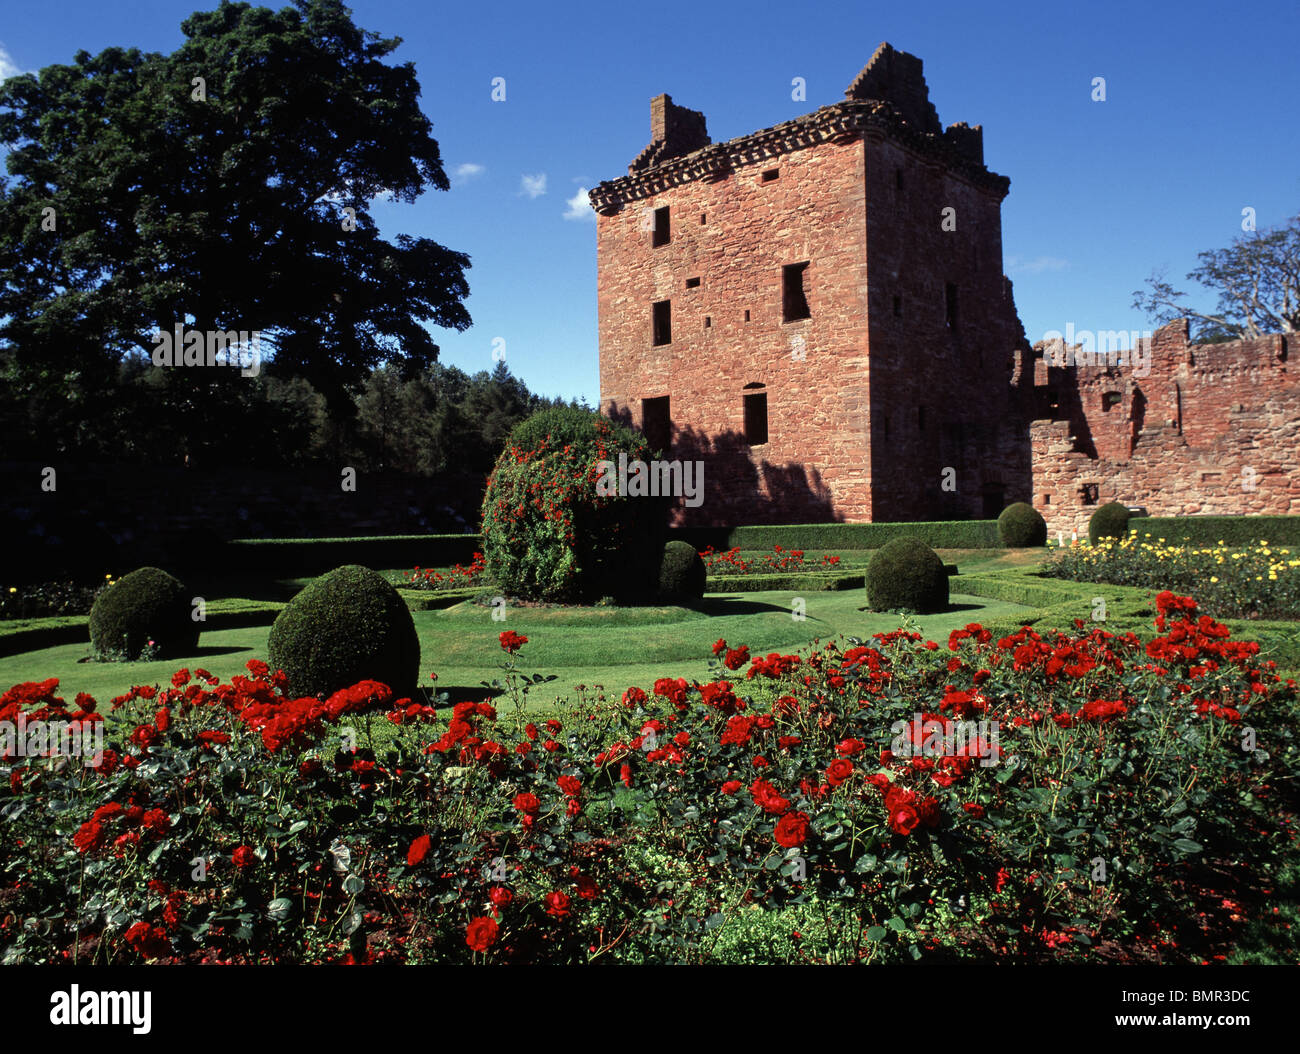 Edzell Castle and garden, a ruined 16th century castle with late medieval tower house, Edzell, Angus, Scotland, U.K. Stock Photo